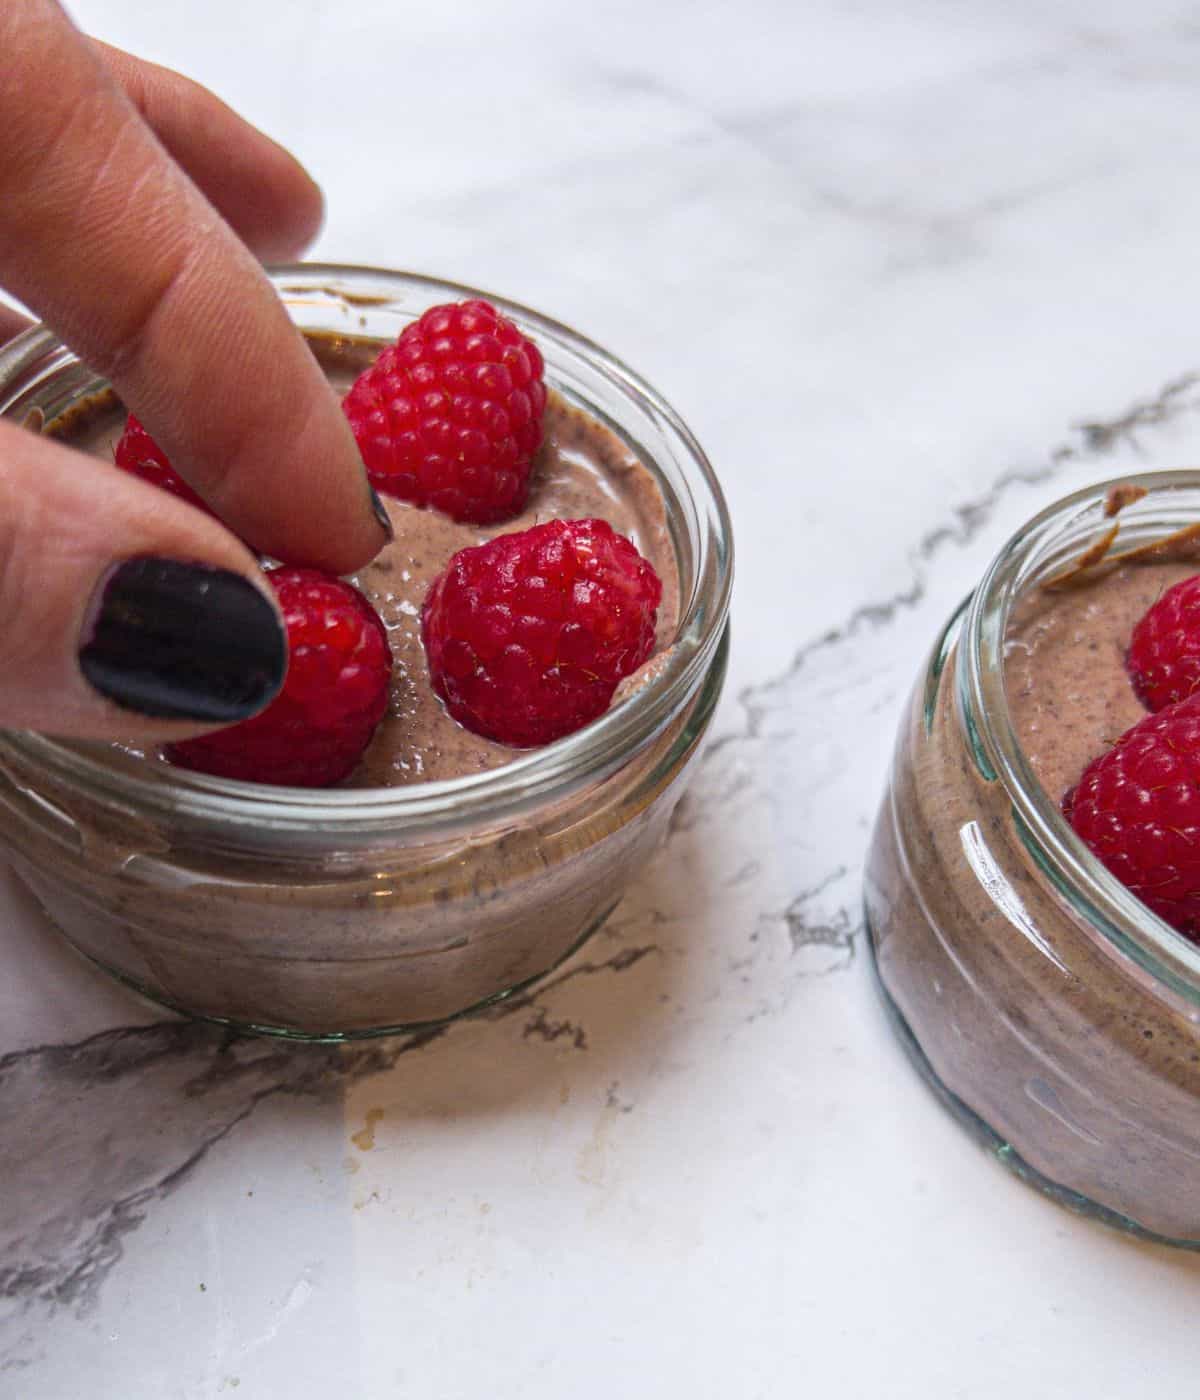 Someone putting raspberries on top of a chocolate mousse.